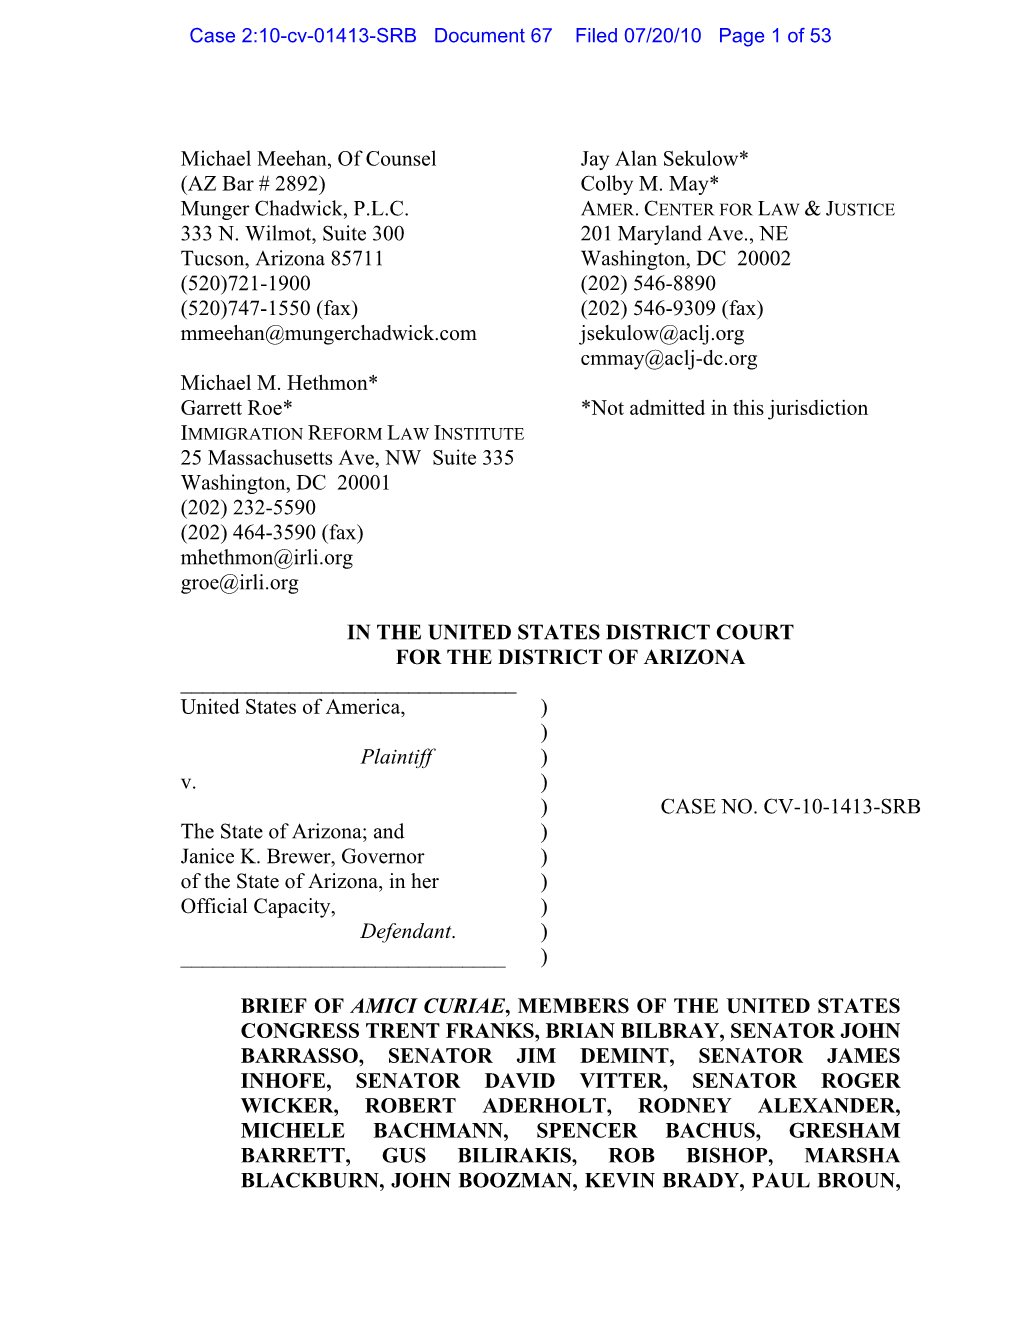 Assisted by FAIR, 81 Members of Congress File Amicus Brief In